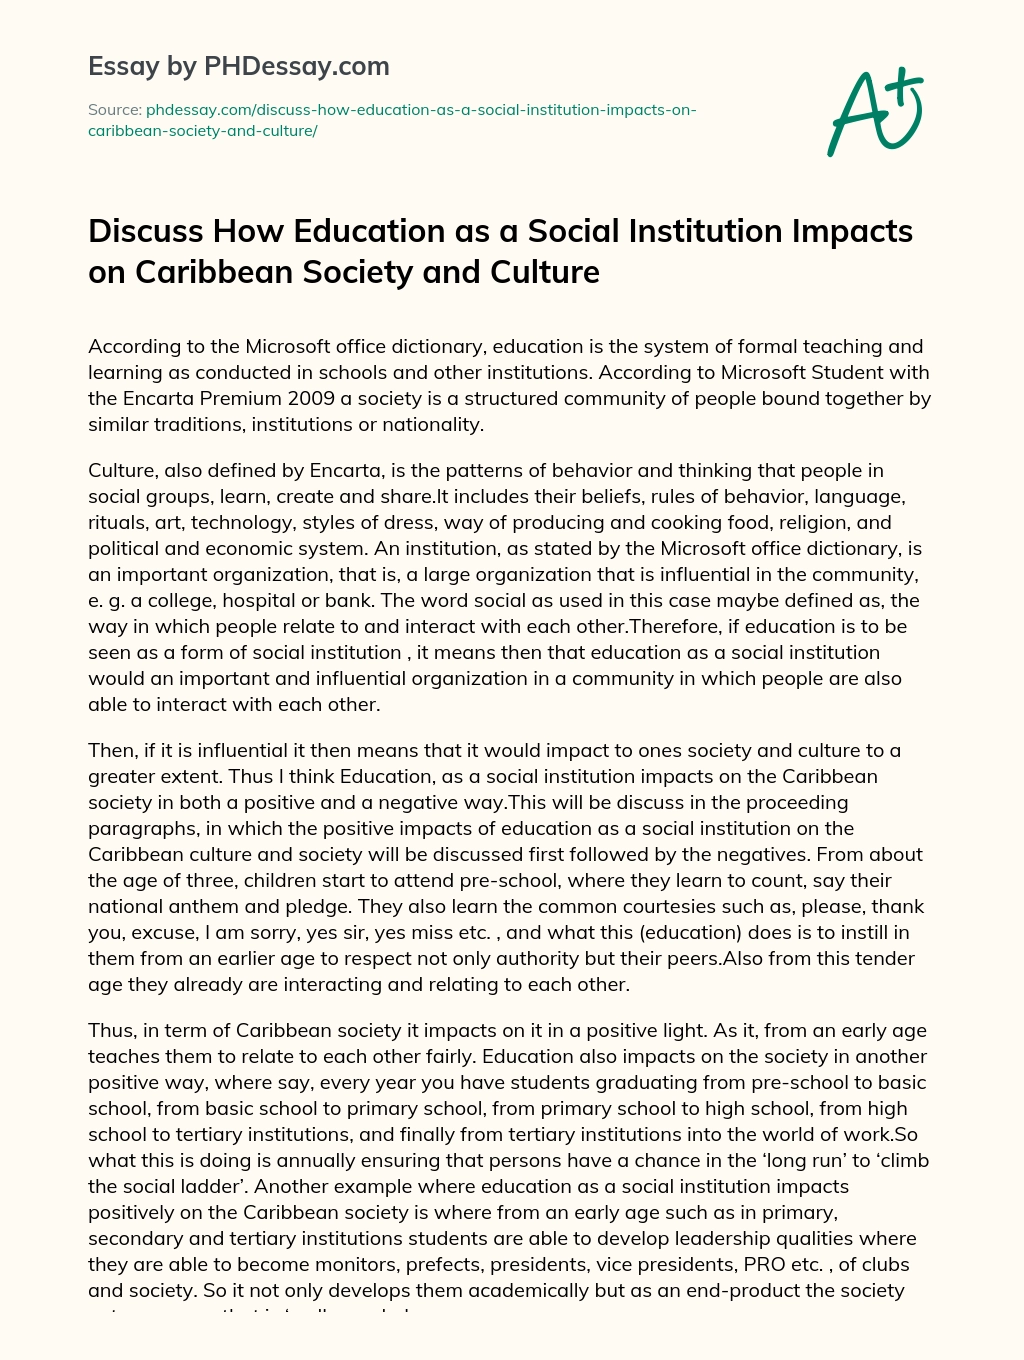 Discuss How Education as a Social Institution Impacts on Caribbean Society and Culture essay